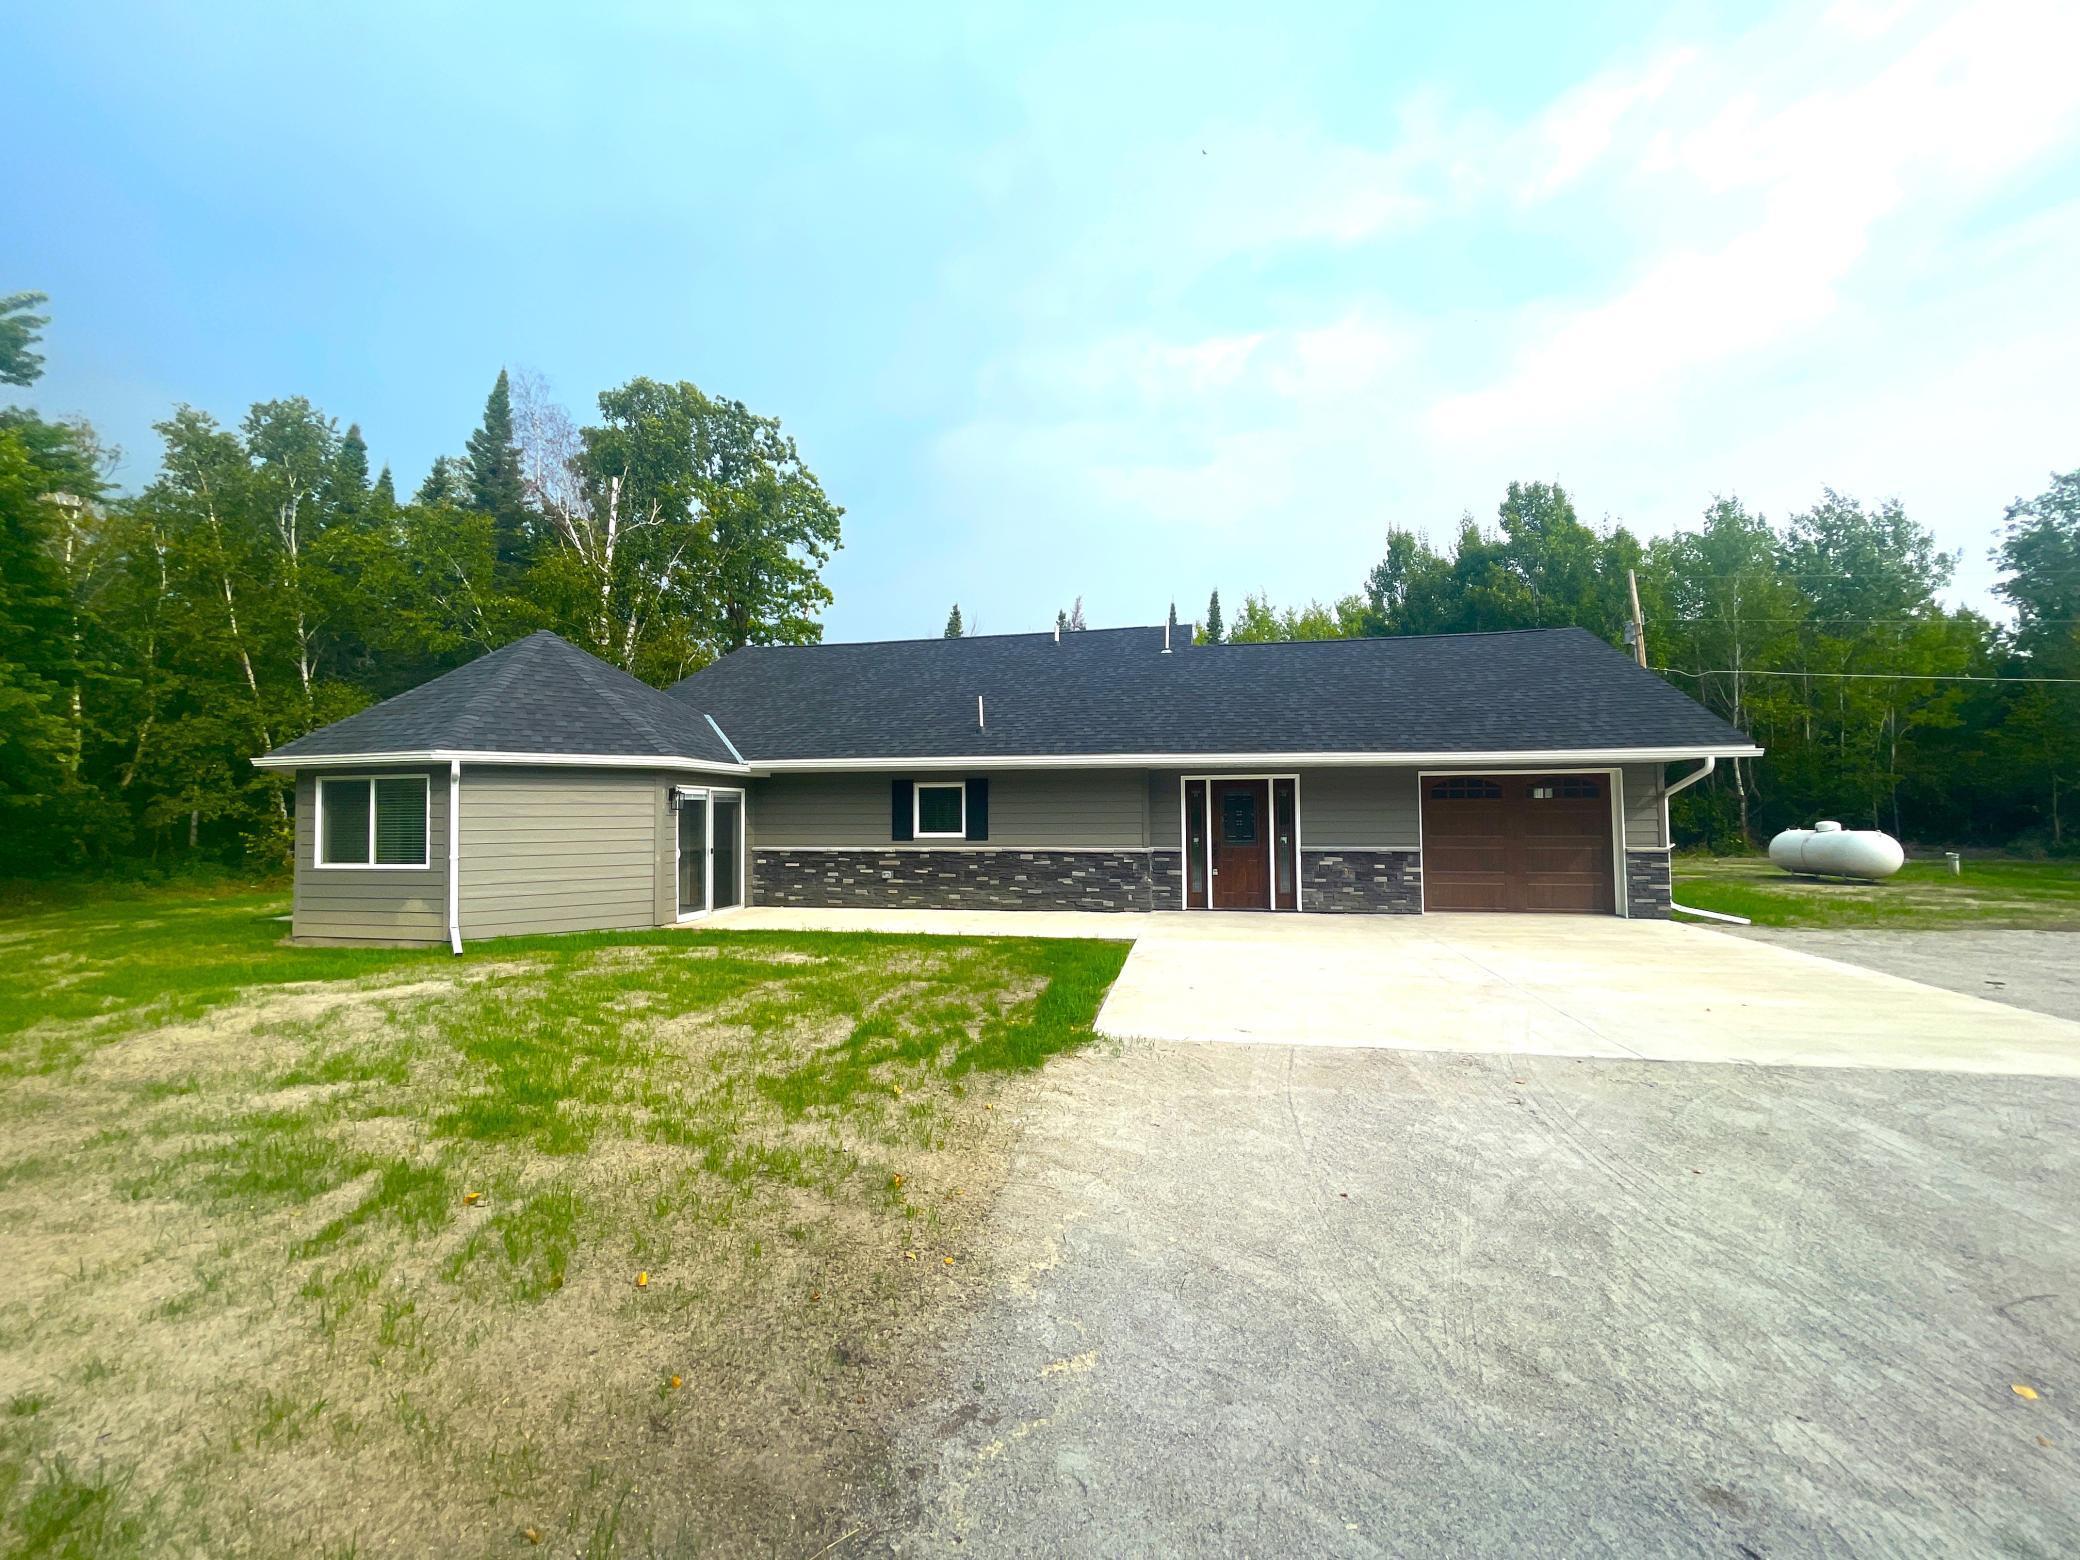 55843 State Hwy 11, Warroad, MN 56763